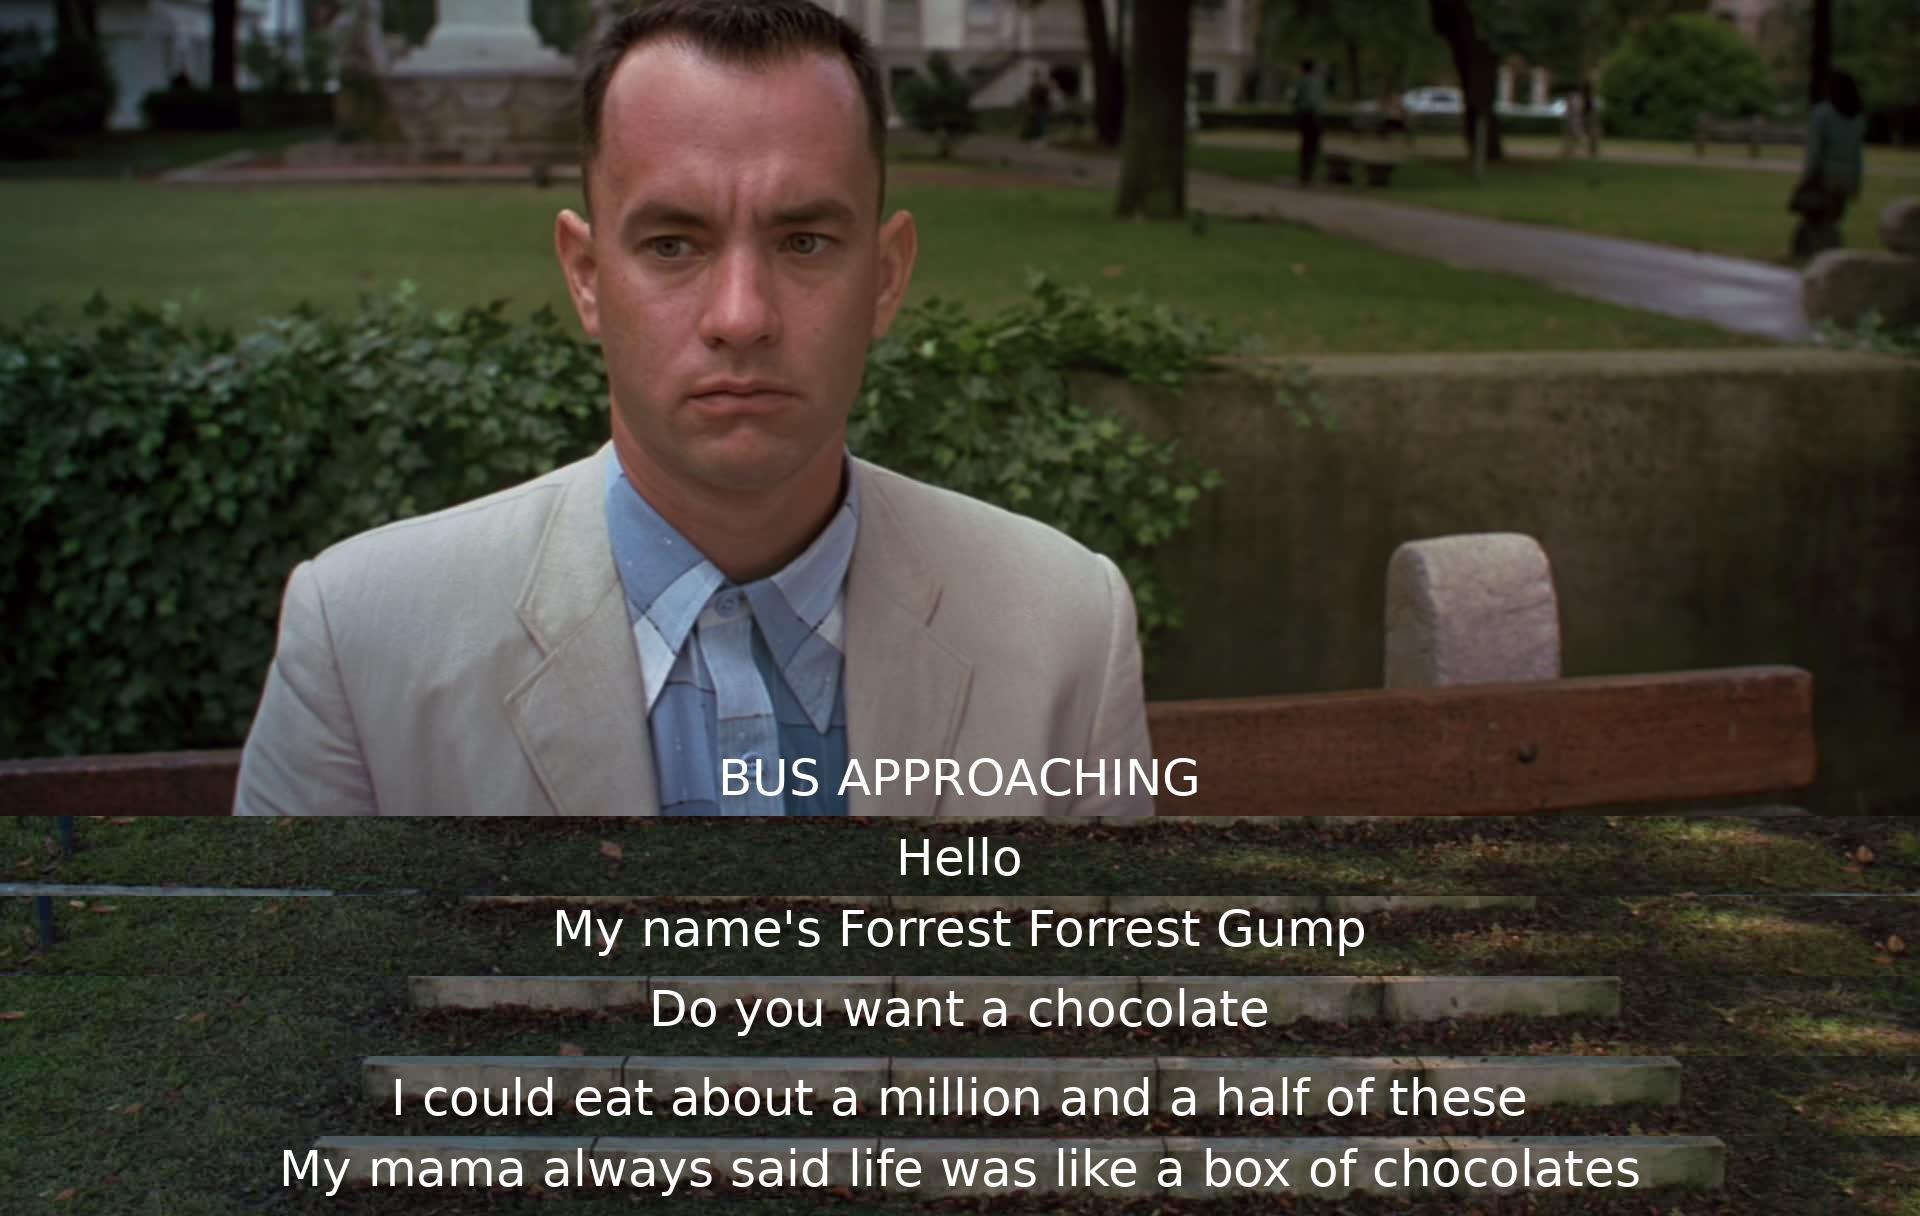 A man named Forrest Gump introduces himself to a stranger and offers them chocolates while reflecting that his mother likened life to a box of chocolates, implying uncertainty in what one may get.